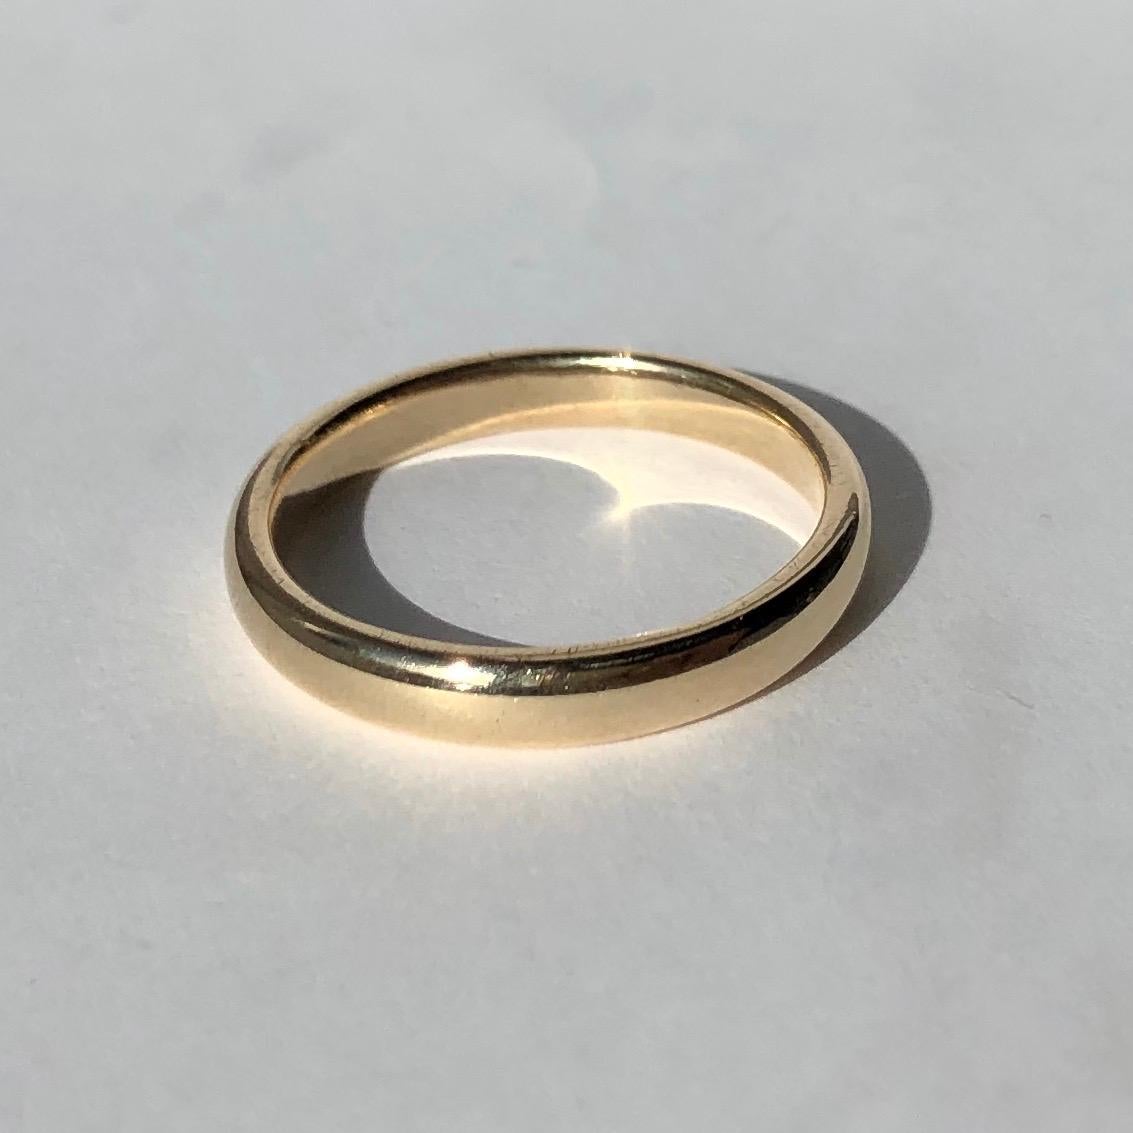 An 9ct gold band makes the perfectly classic wedding band or a great everyday wear piece. Made in London, England. 

Ring Size: M or 6 1/4 
Band Width: 2mm 

Weight: 2.46g